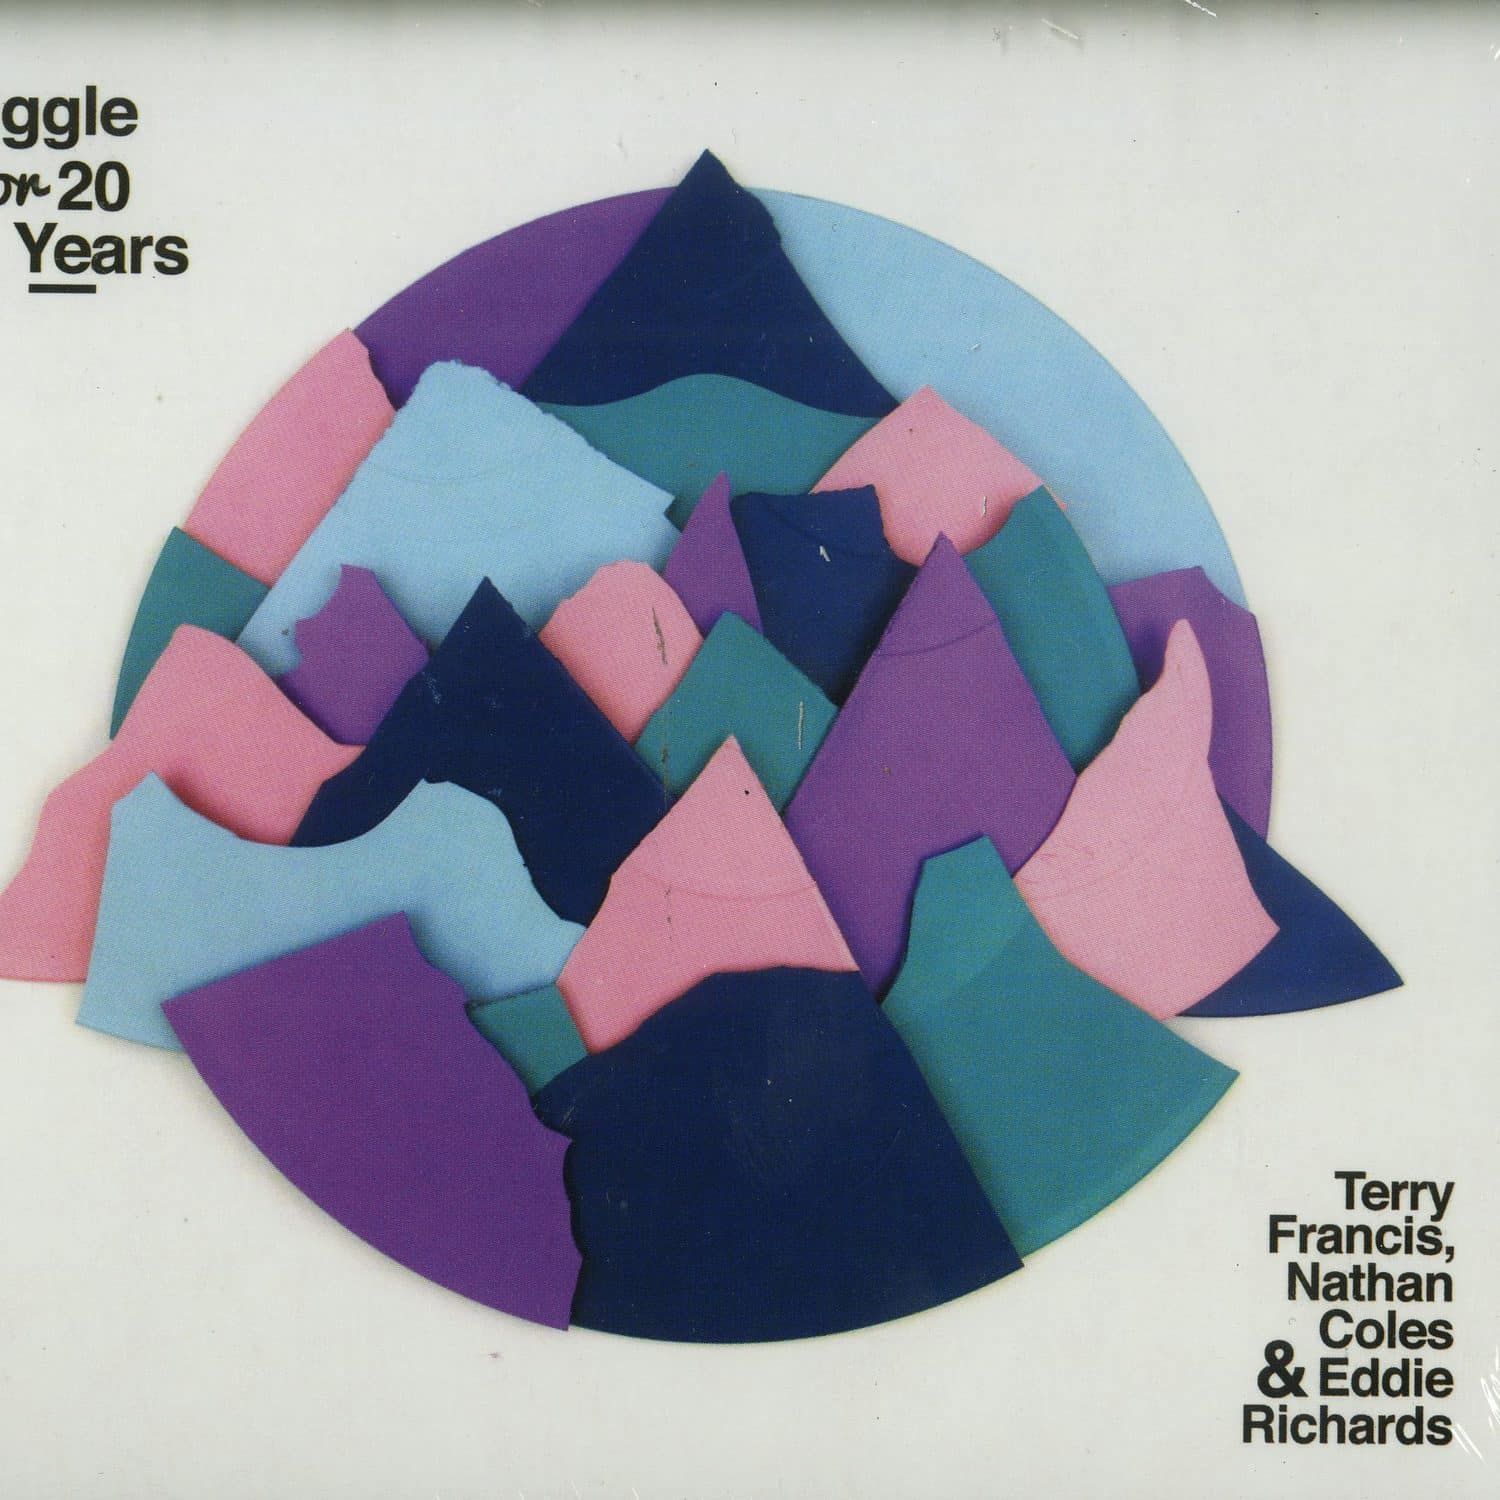 Terry Francis / Nathan Coles / Eddie Richards - WIGGLE FOR 20 YEARS 